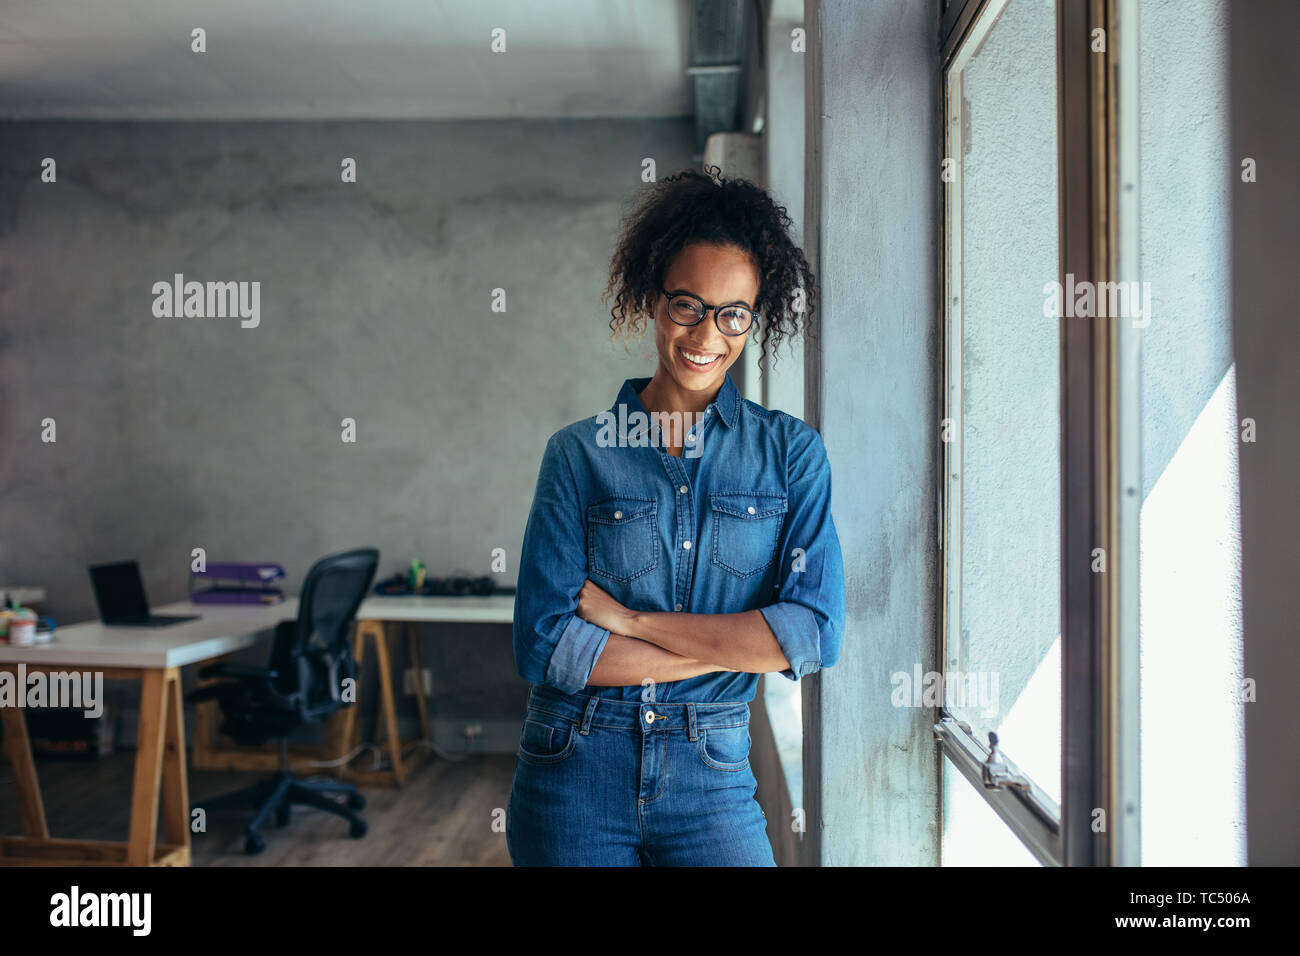 Confident entrepreneur standing in office with her arms crossed. Smiling young businesswoman standing in office and looking at camera. Stock Photo